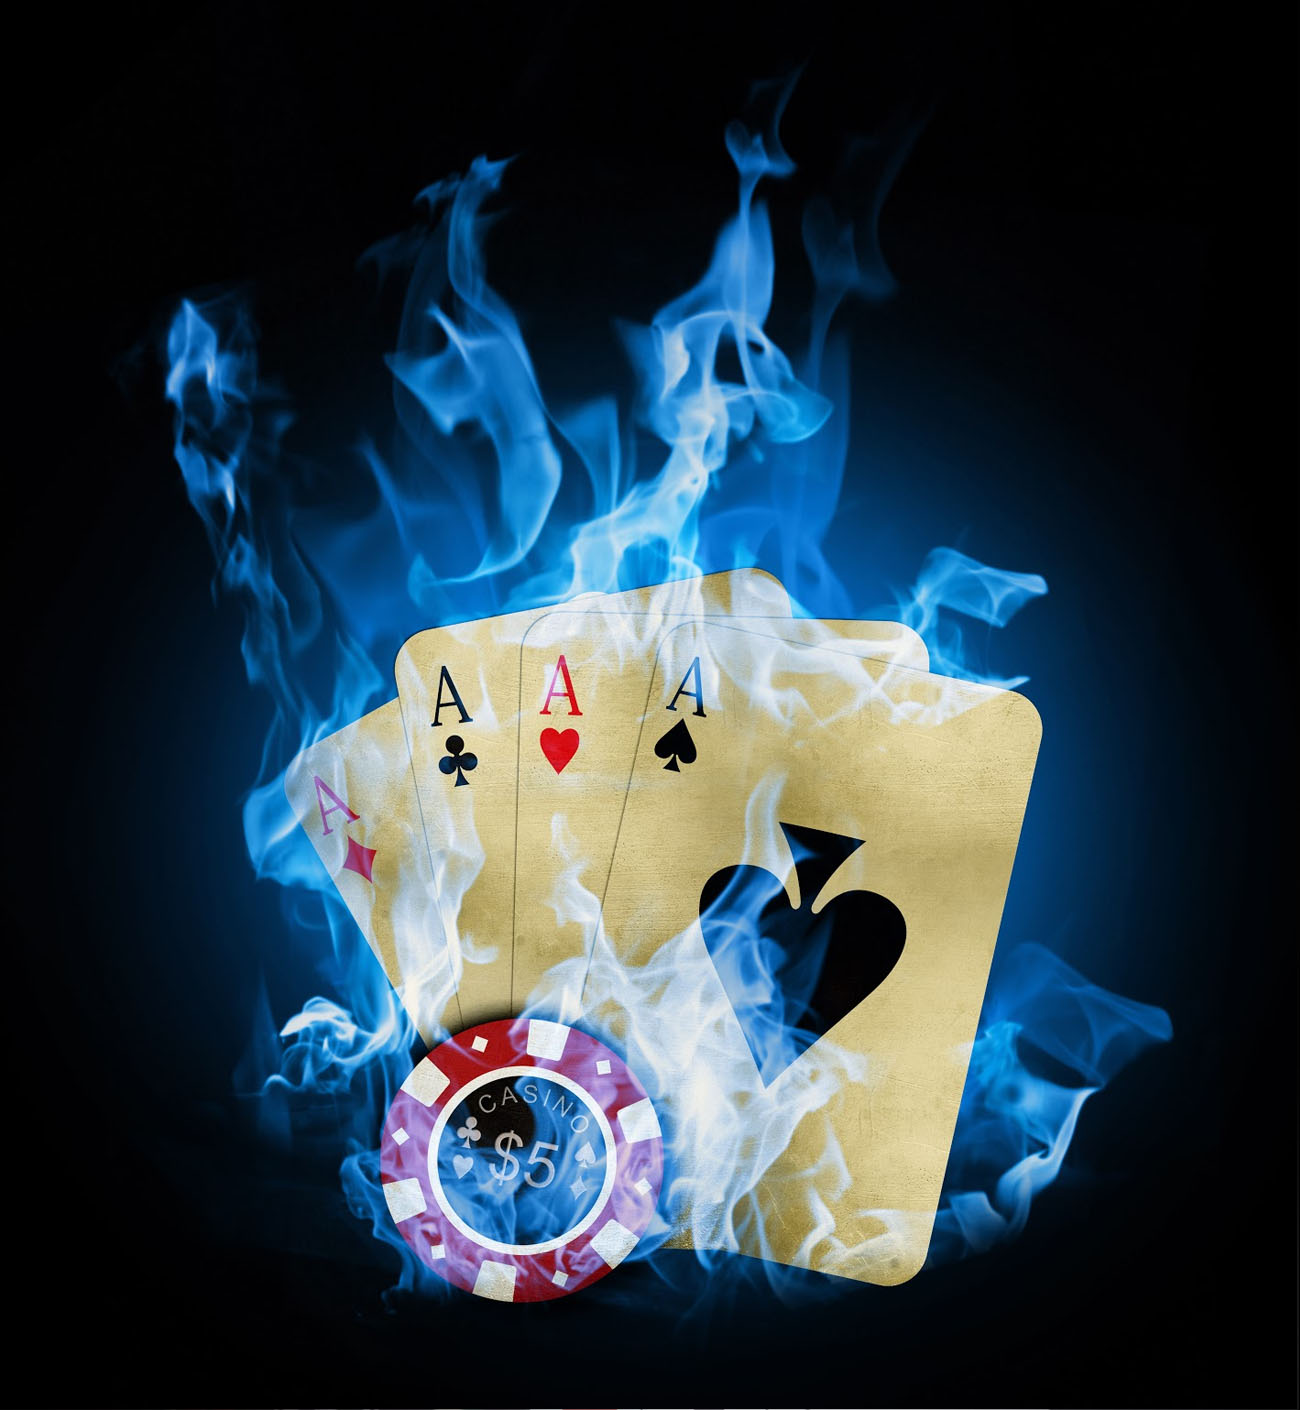 if you are looking for the best shop for spy cheating playing cards and playing cards lens with cheap price then visit our site actionspycards.com and get here best spy cheaing playing cards with best playing cards lens. Don’t go anywhere only visit our site and get best spy cheaing playing cards with best playing cards lens from our shop.